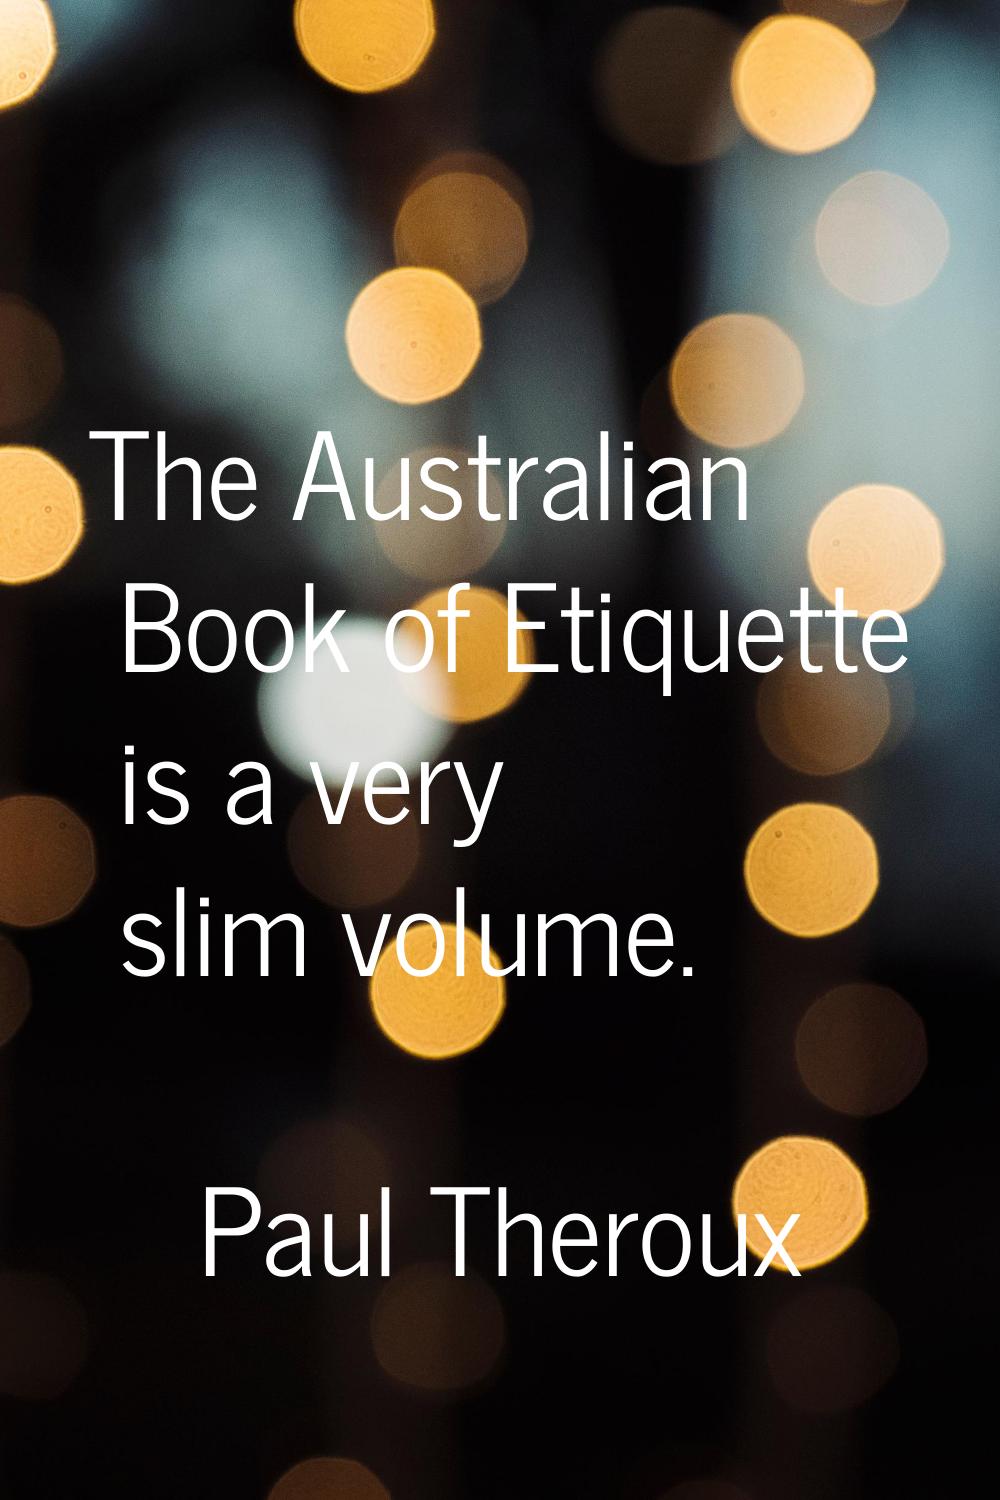 The Australian Book of Etiquette is a very slim volume.